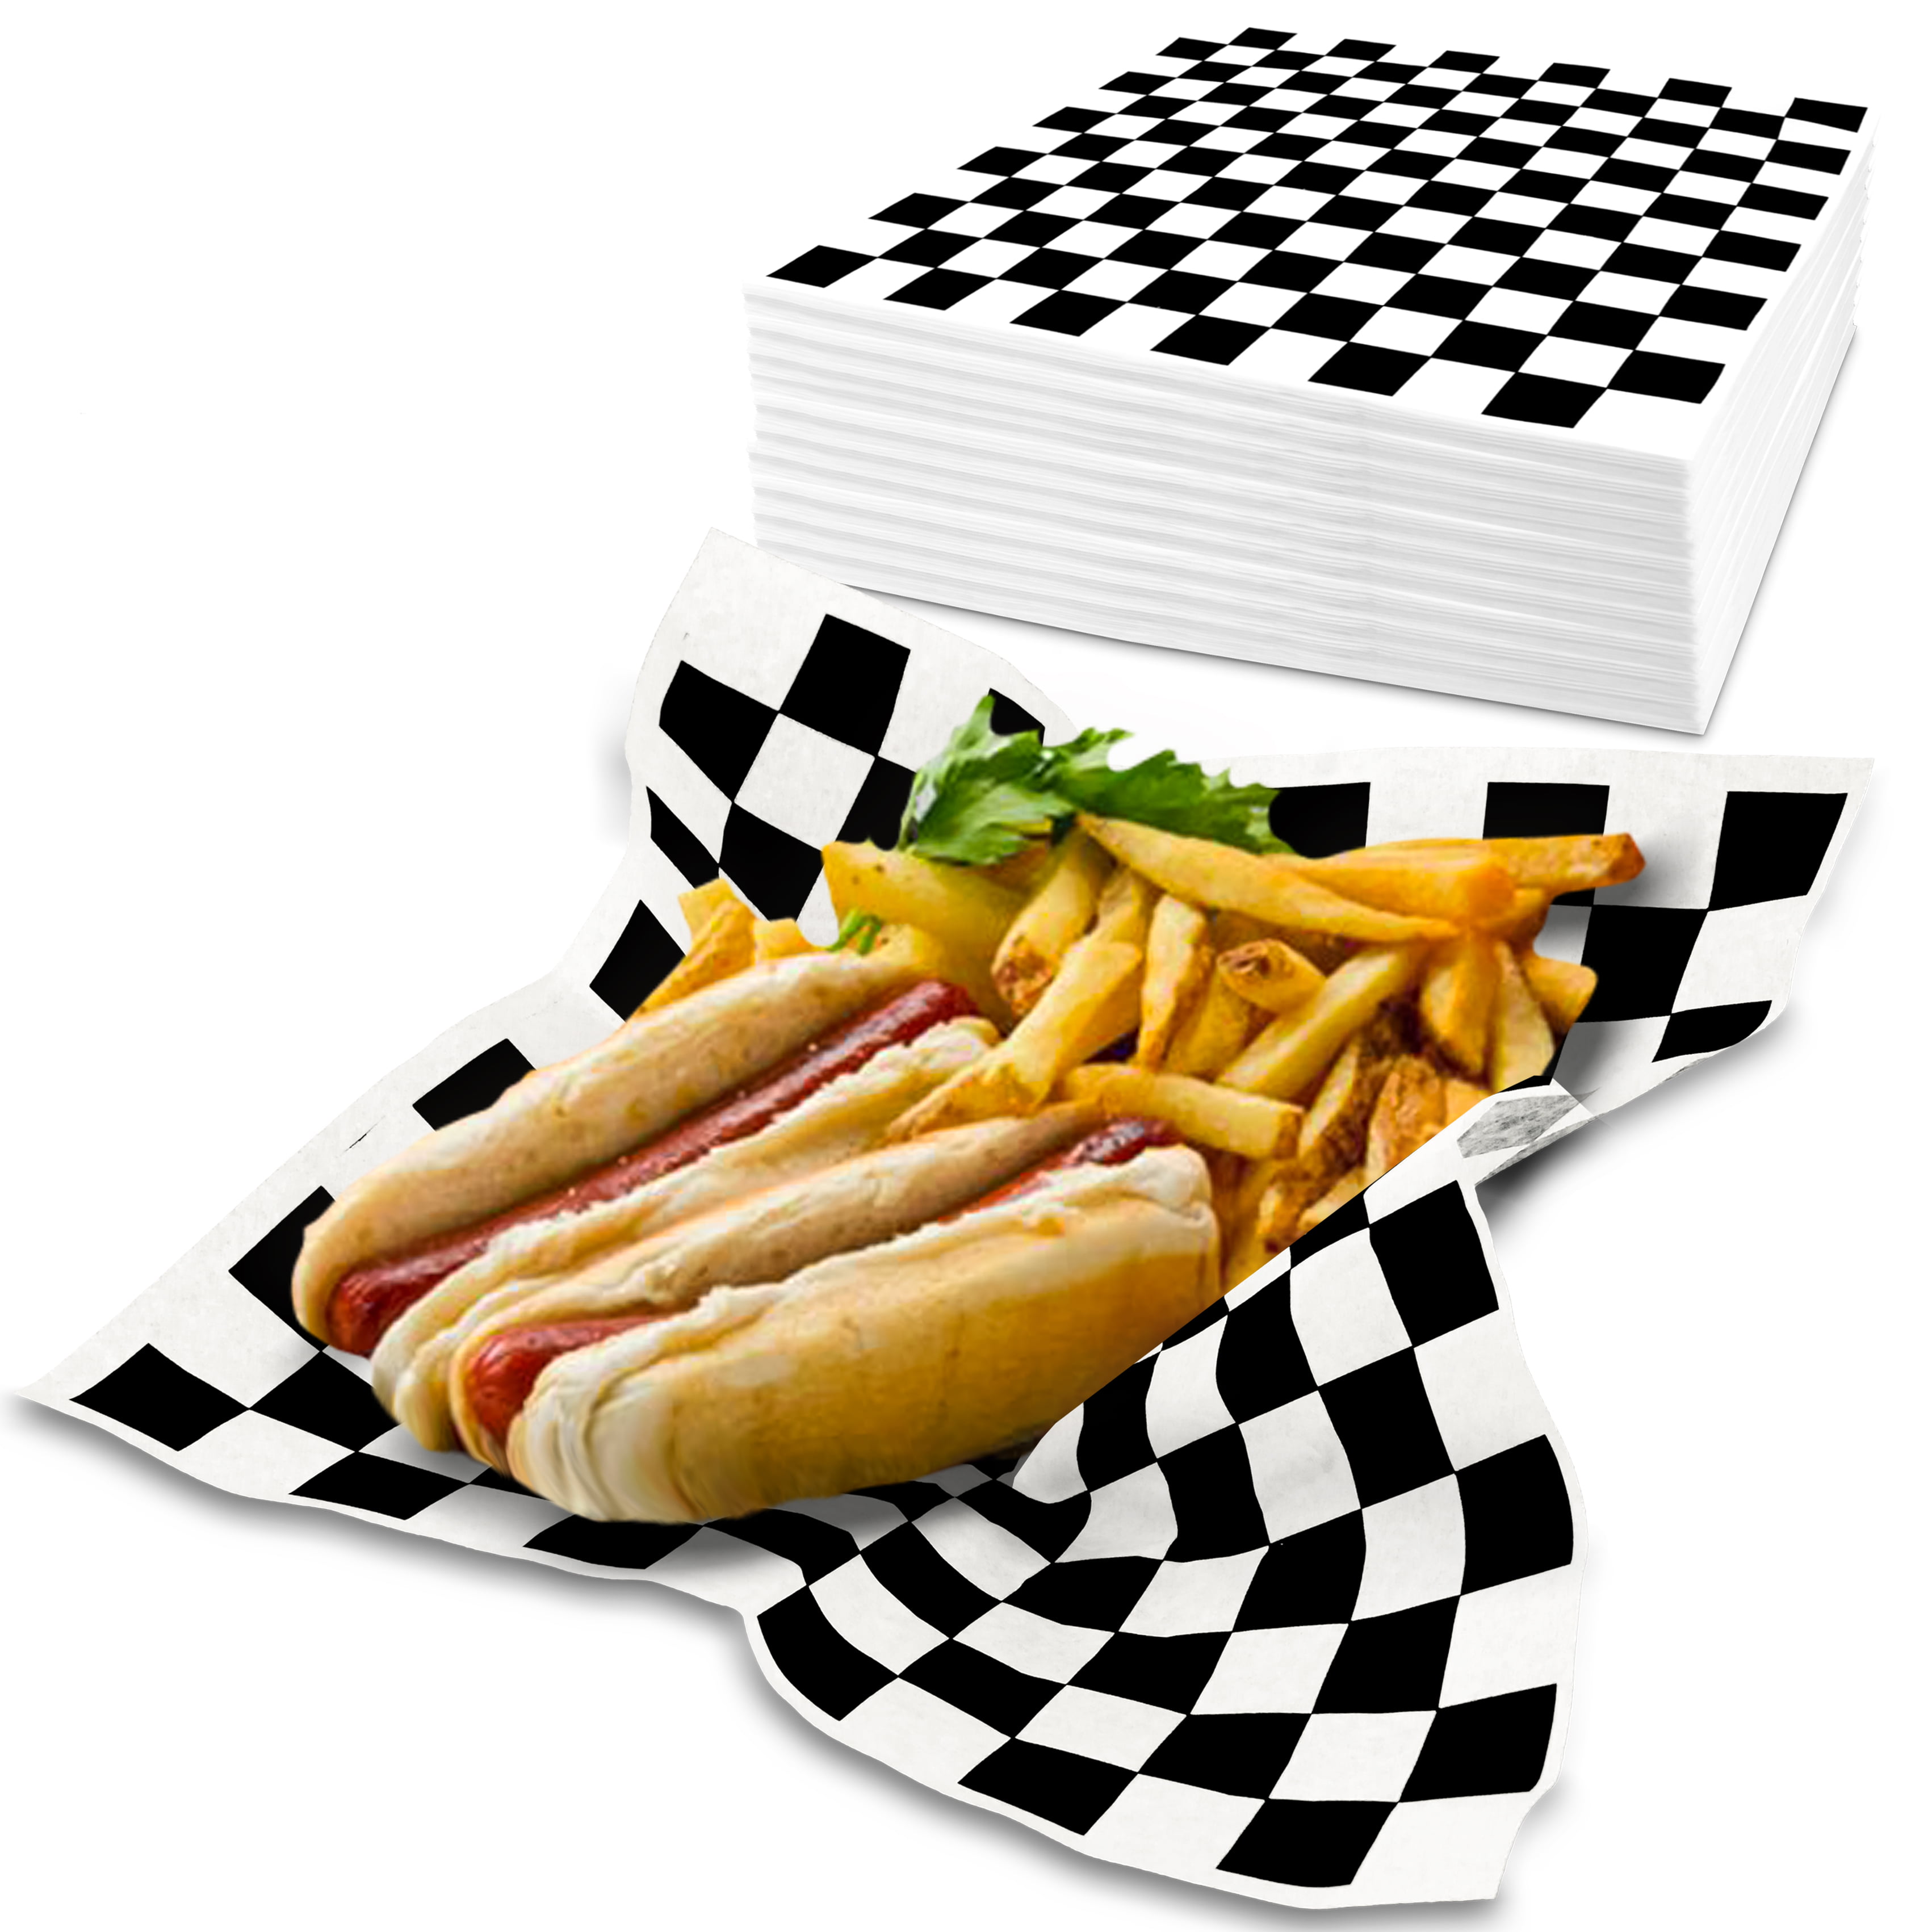 25 Mix~Burger Hot Food Wrap Paper Sheets Greaseproof/Wax Party Chip Basket Liner 